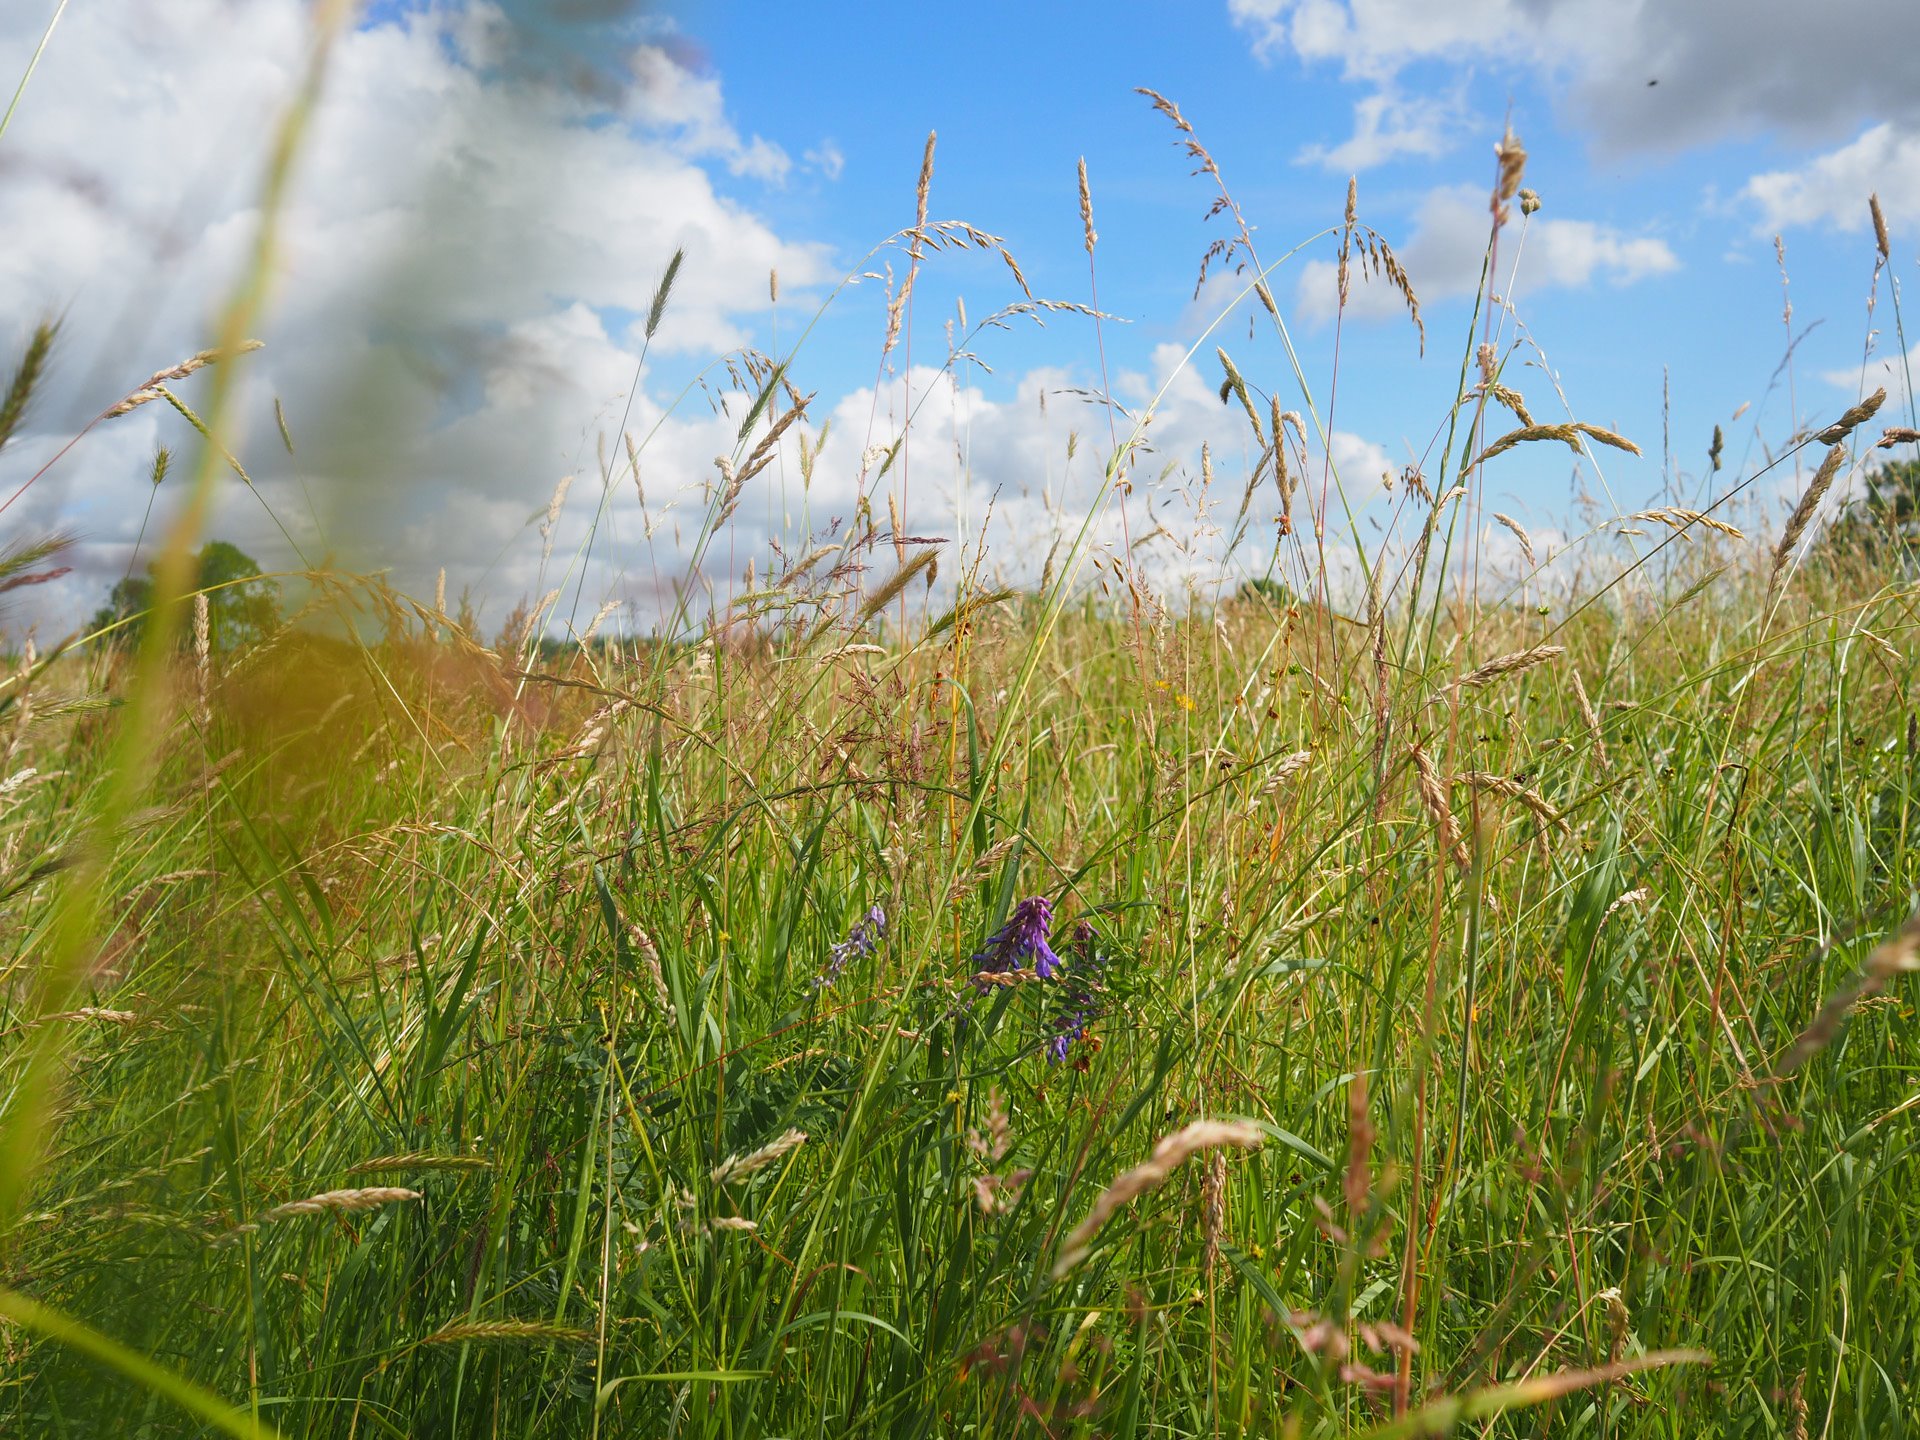 Long grasses with wildflowers in rewilding project at UK wedding venue